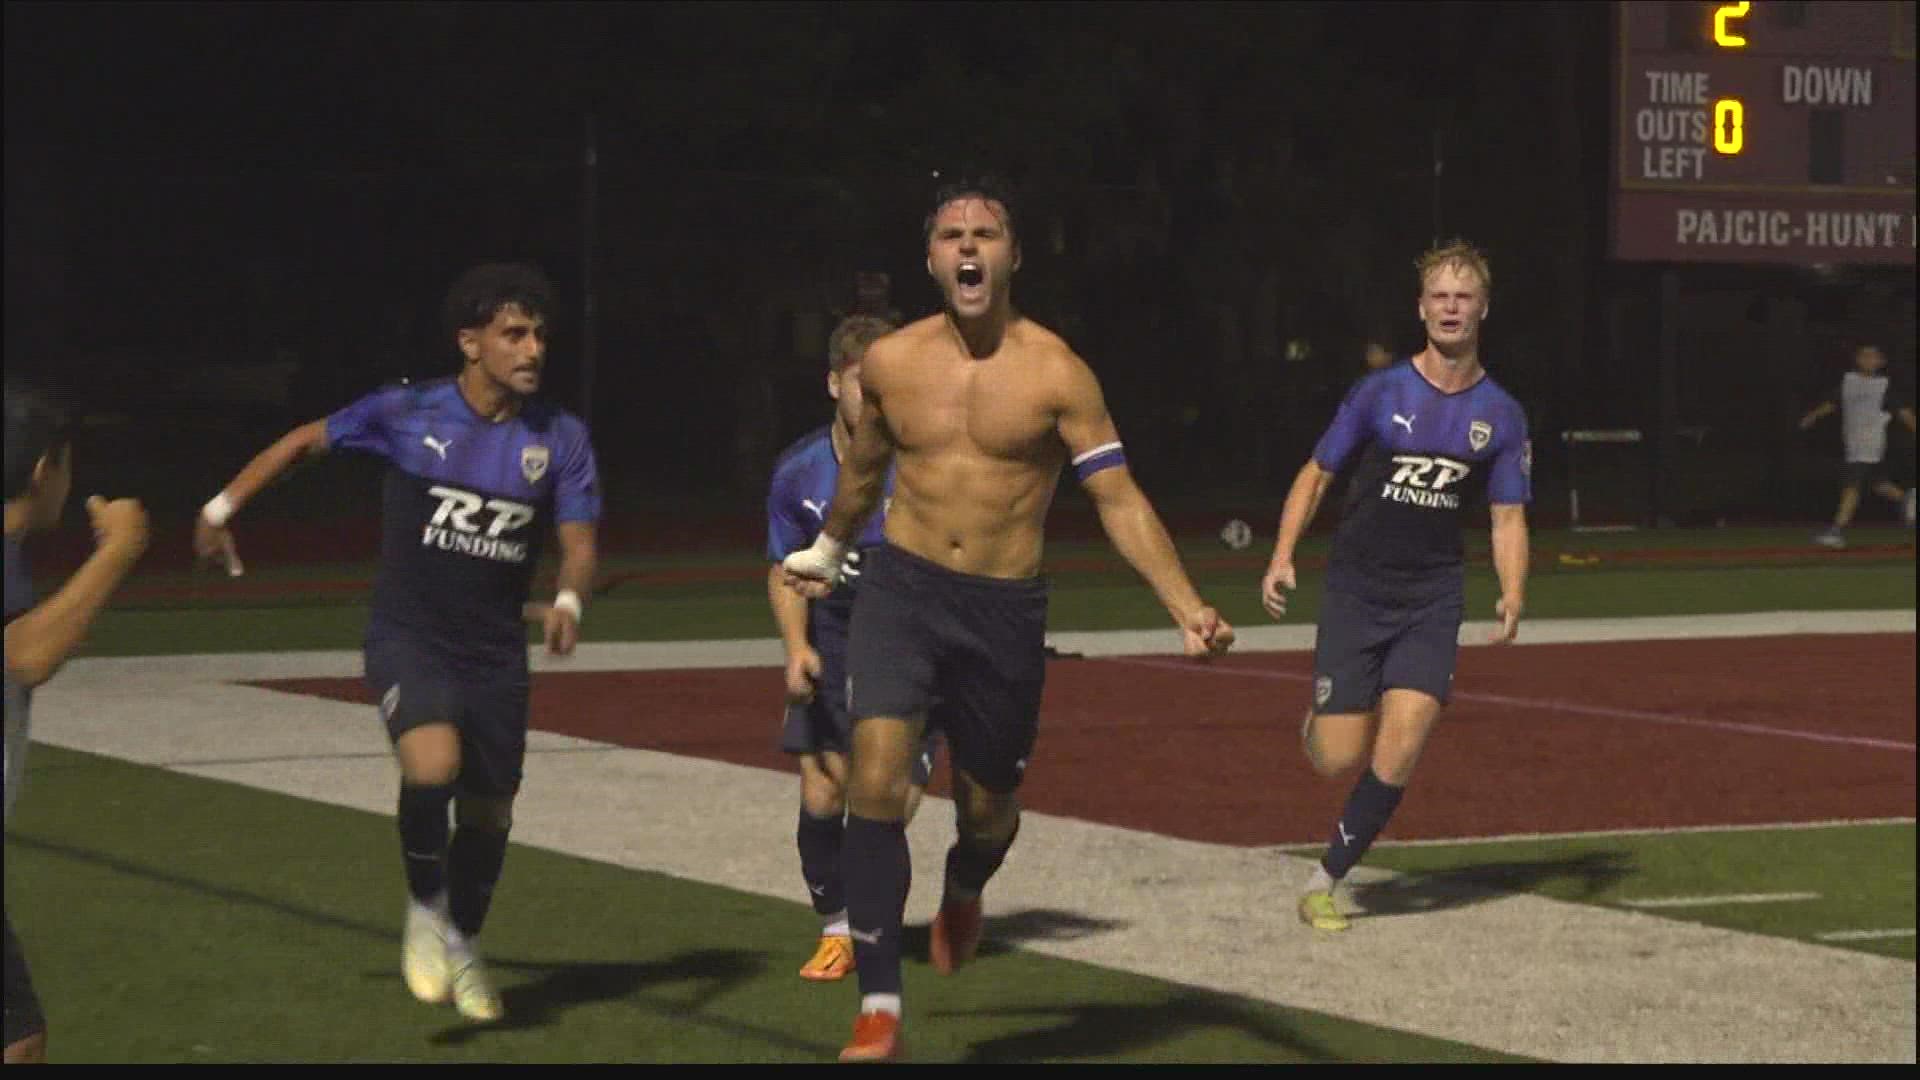 The Armada have several players who have played soccer locally. Including Fleming Island grad, Reed Davis, who scored the game-winner in the South Region Final.